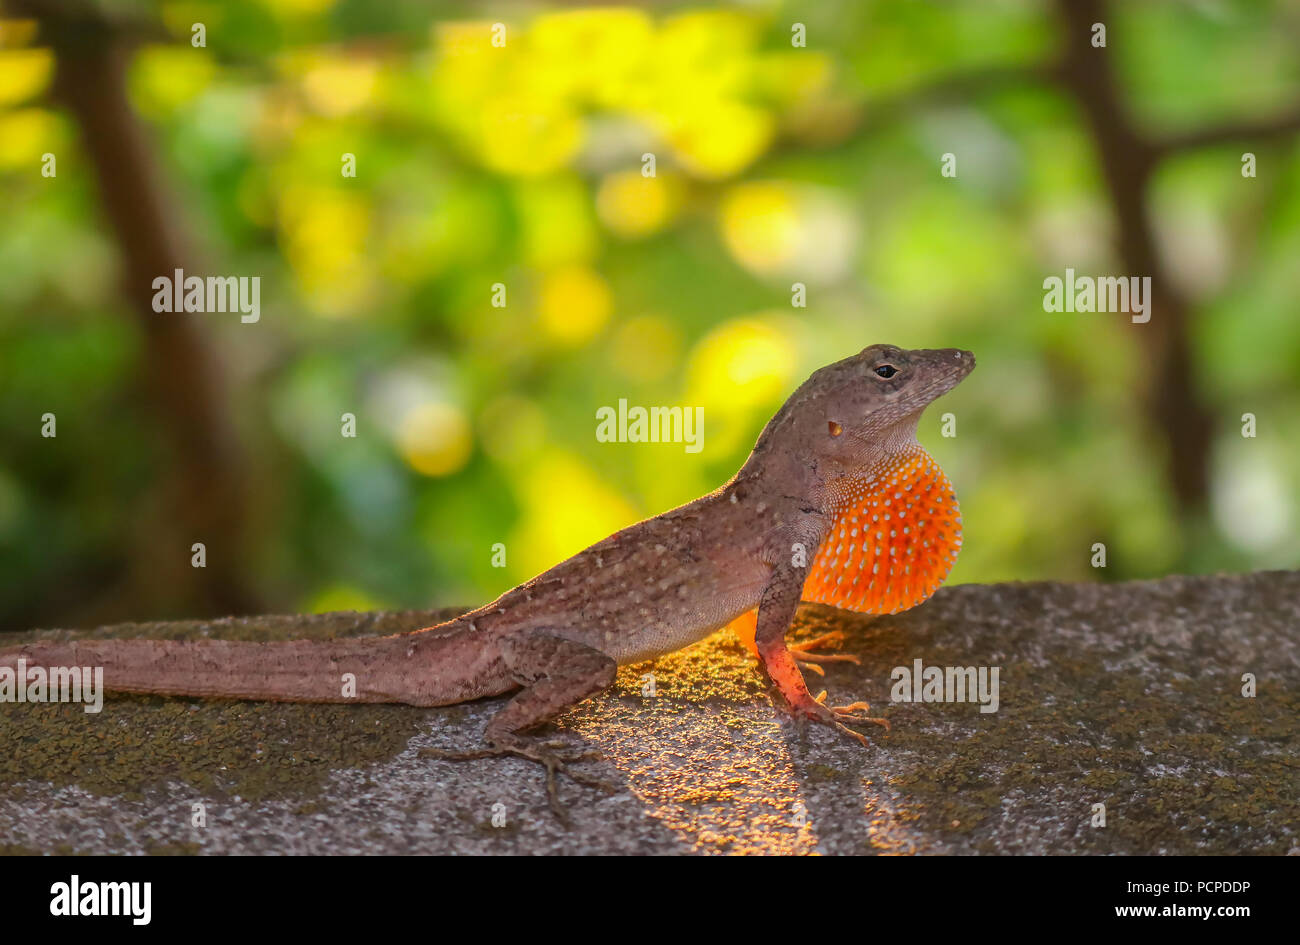 Anole lizard close up profile with sun glowing through dewlap Stock Photo